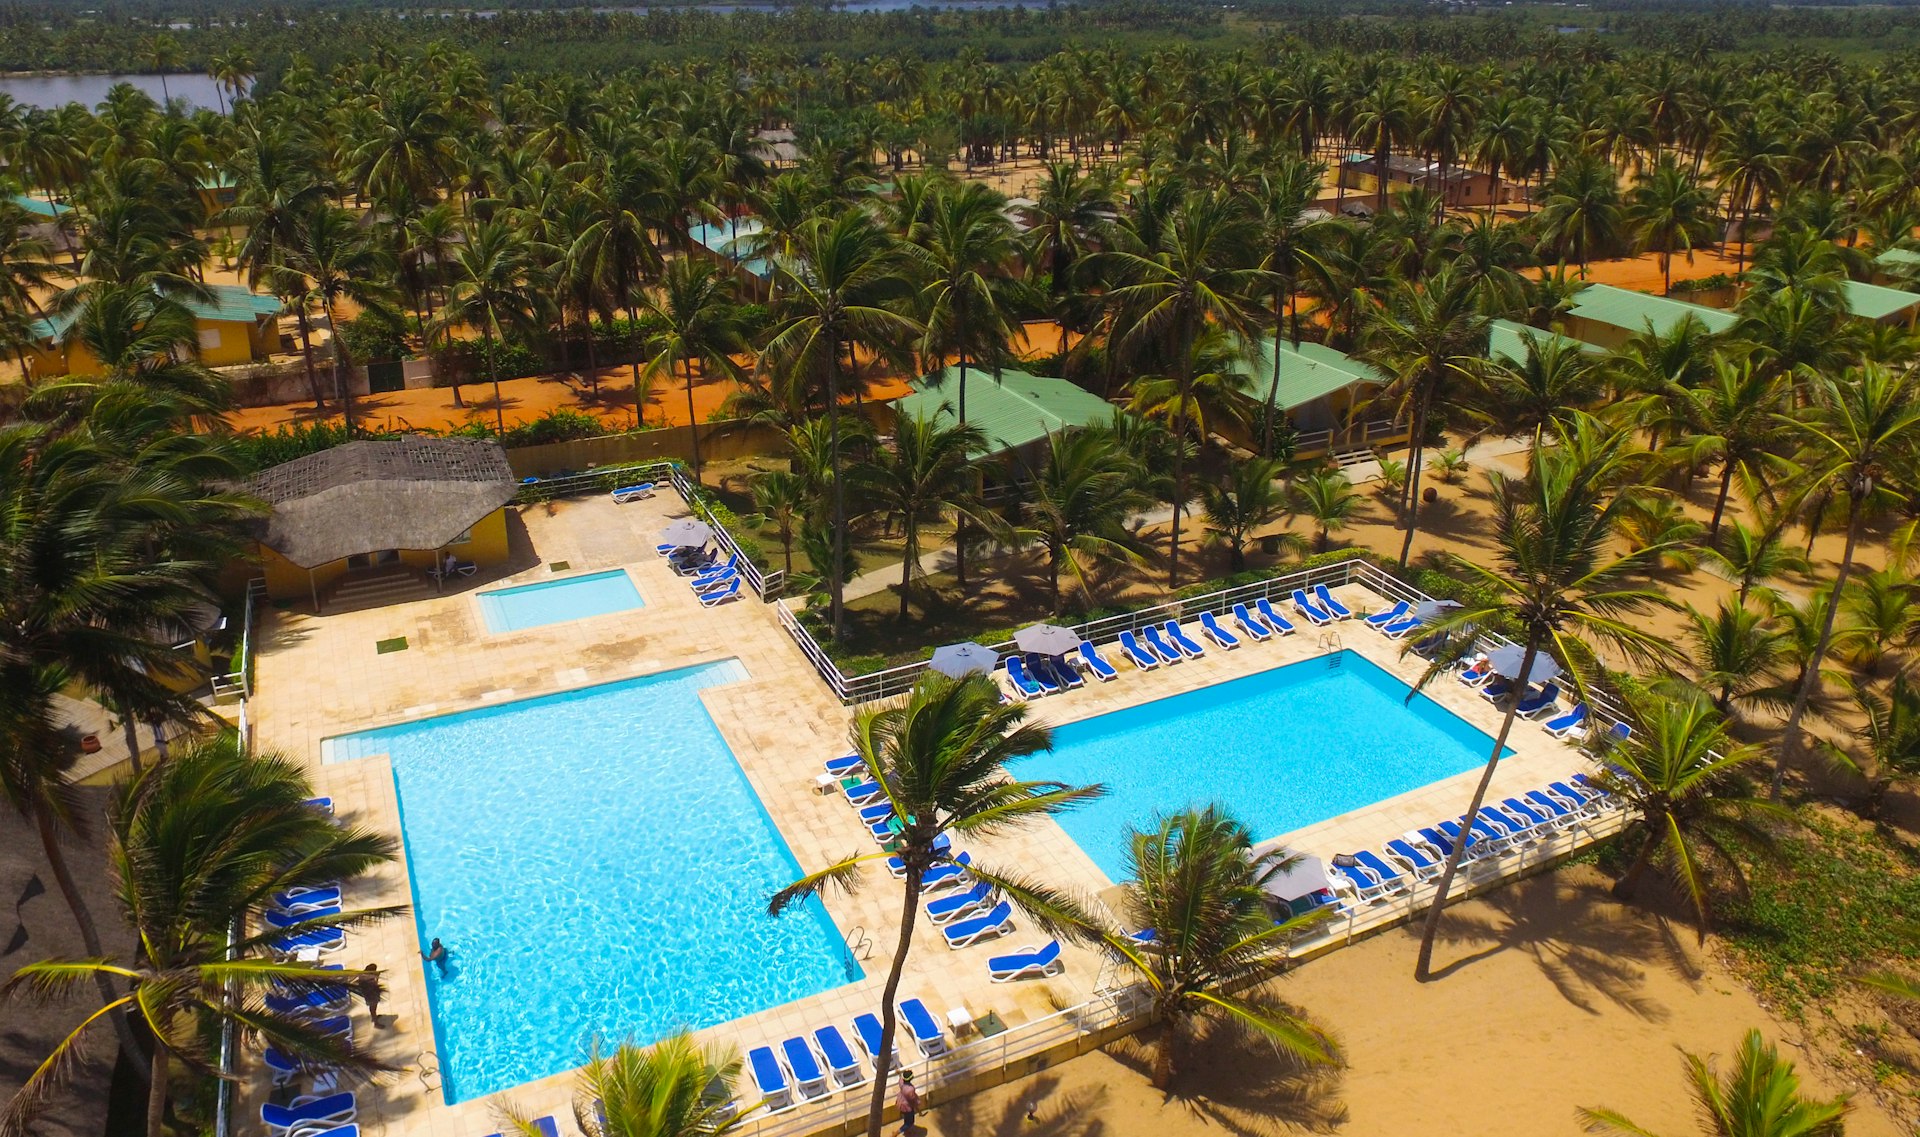 Two swimming pools surrounded by loungers and palm trees